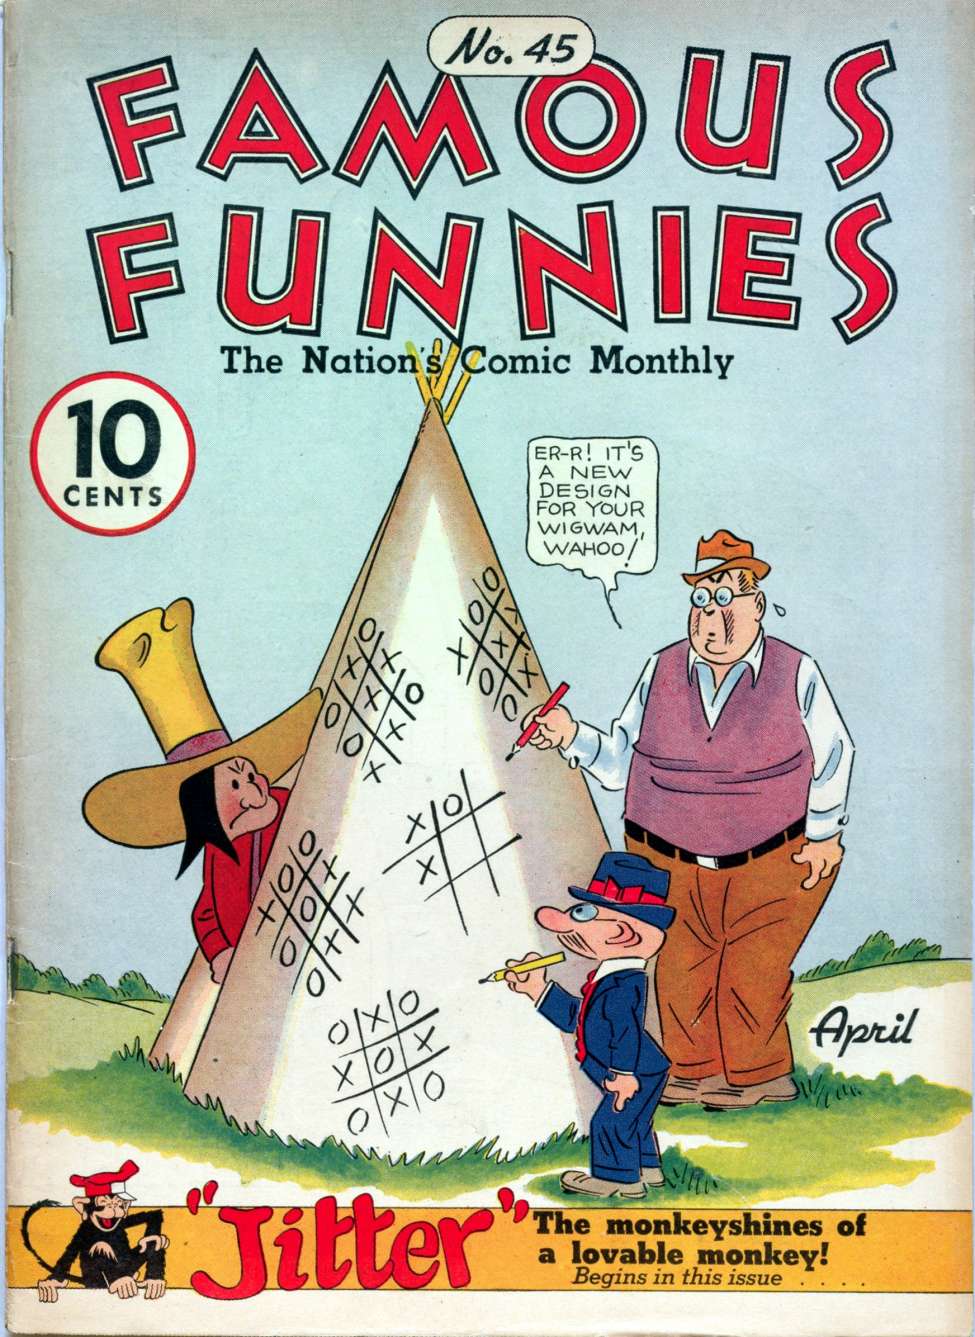 Book Cover For Famous Funnies 45